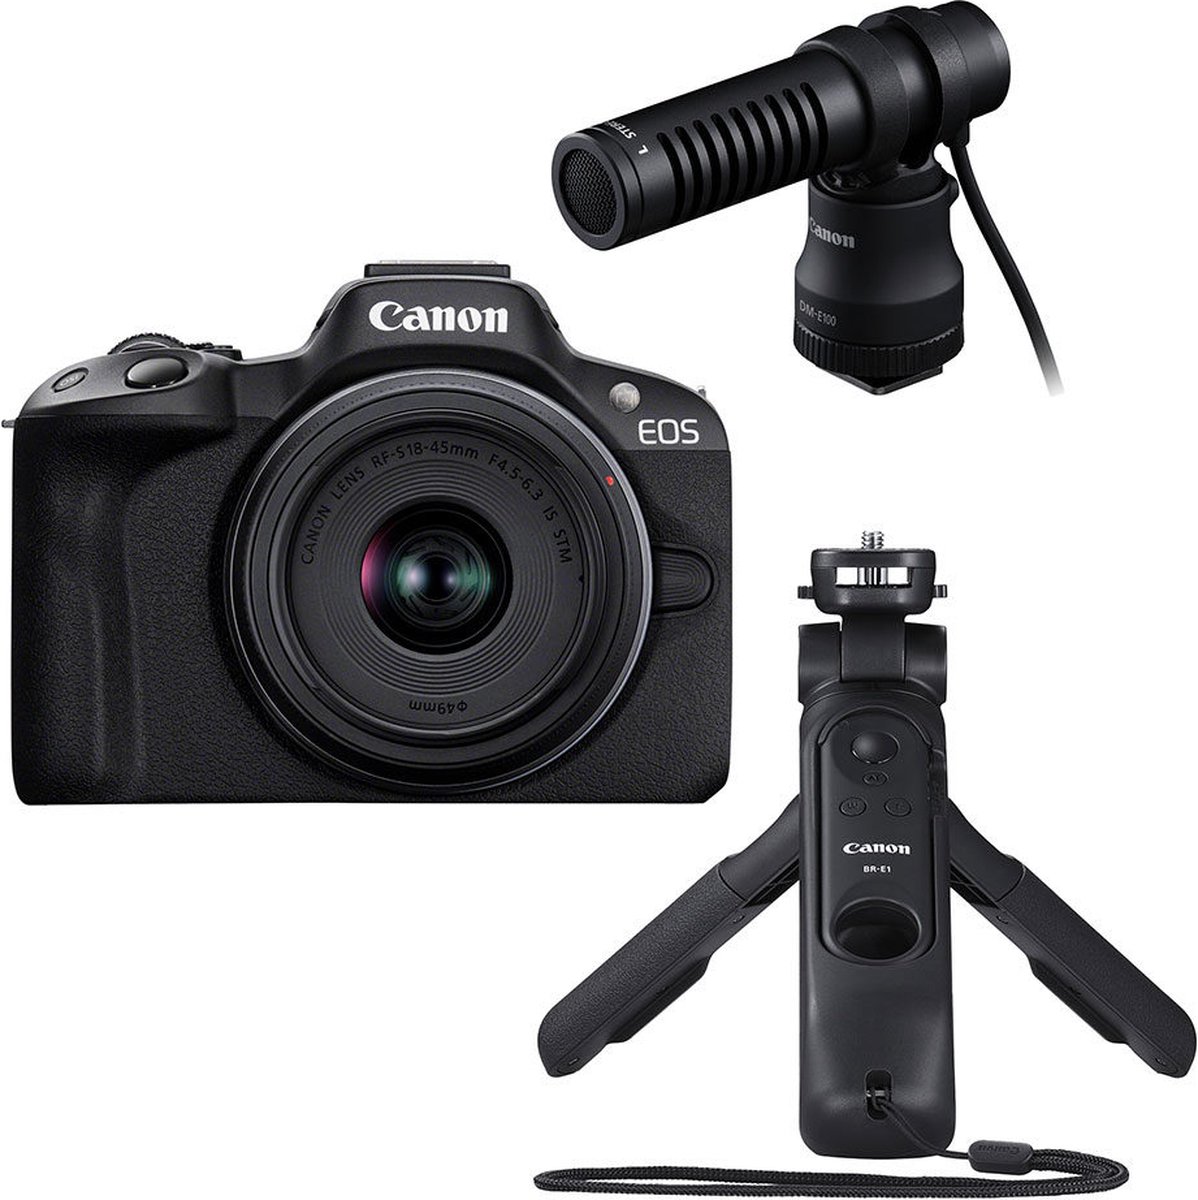 Canon EOS R50 - Systeemcamera content creator kit - + RF-S 18-45mm f/4.5-6.3 IS STM-lens, Microfoon, Windscherm & Statief - Canon